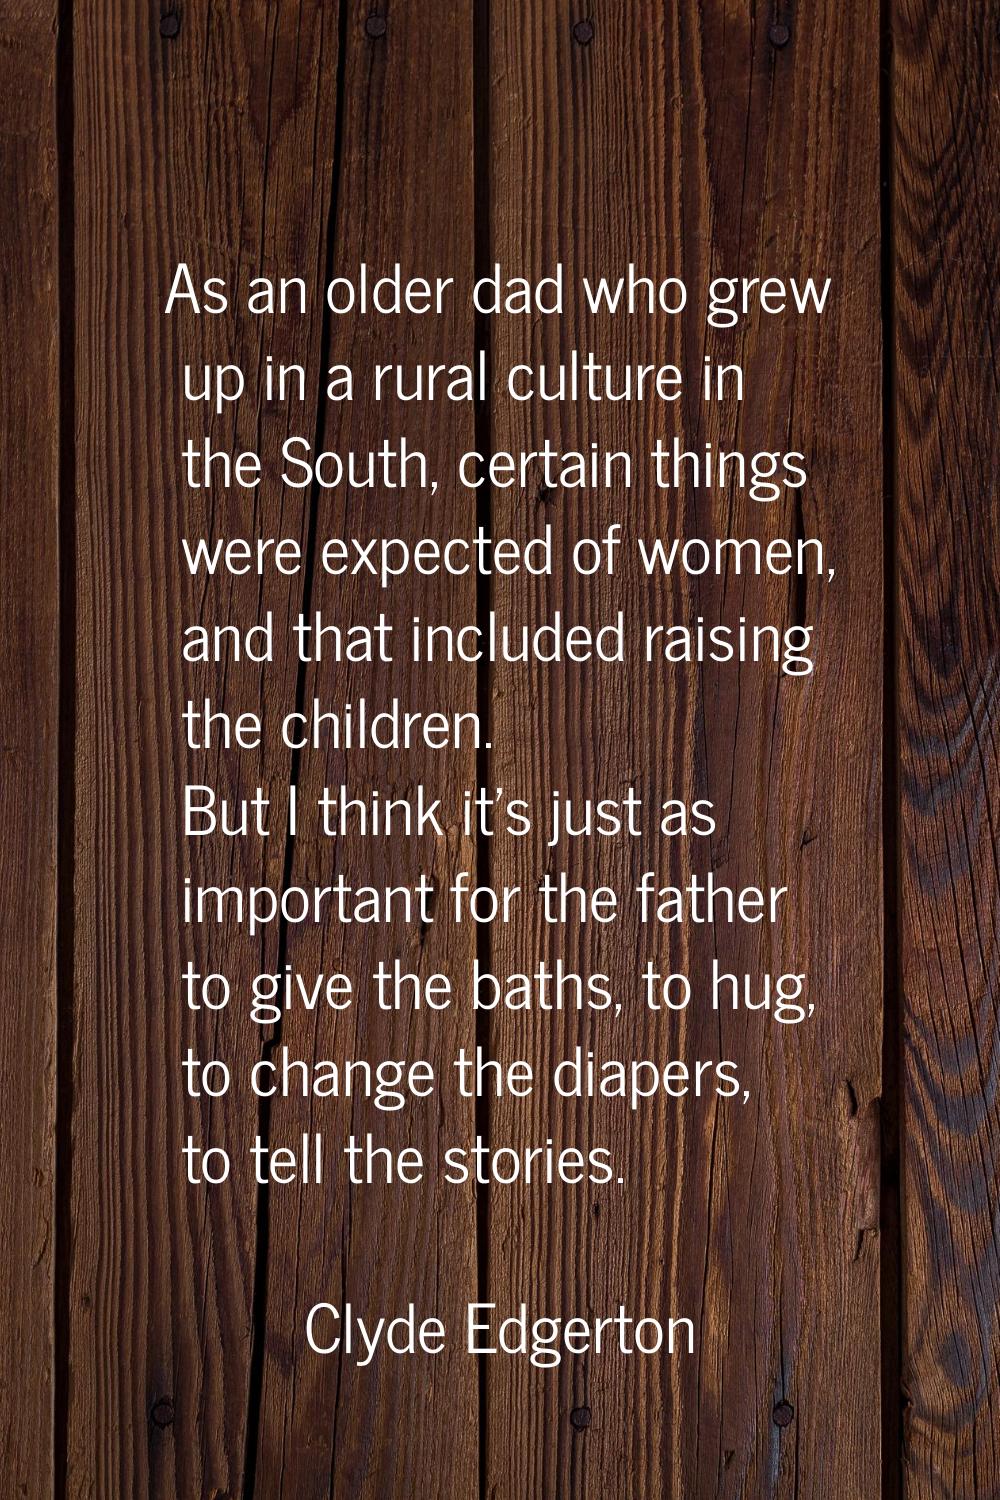 As an older dad who grew up in a rural culture in the South, certain things were expected of women,